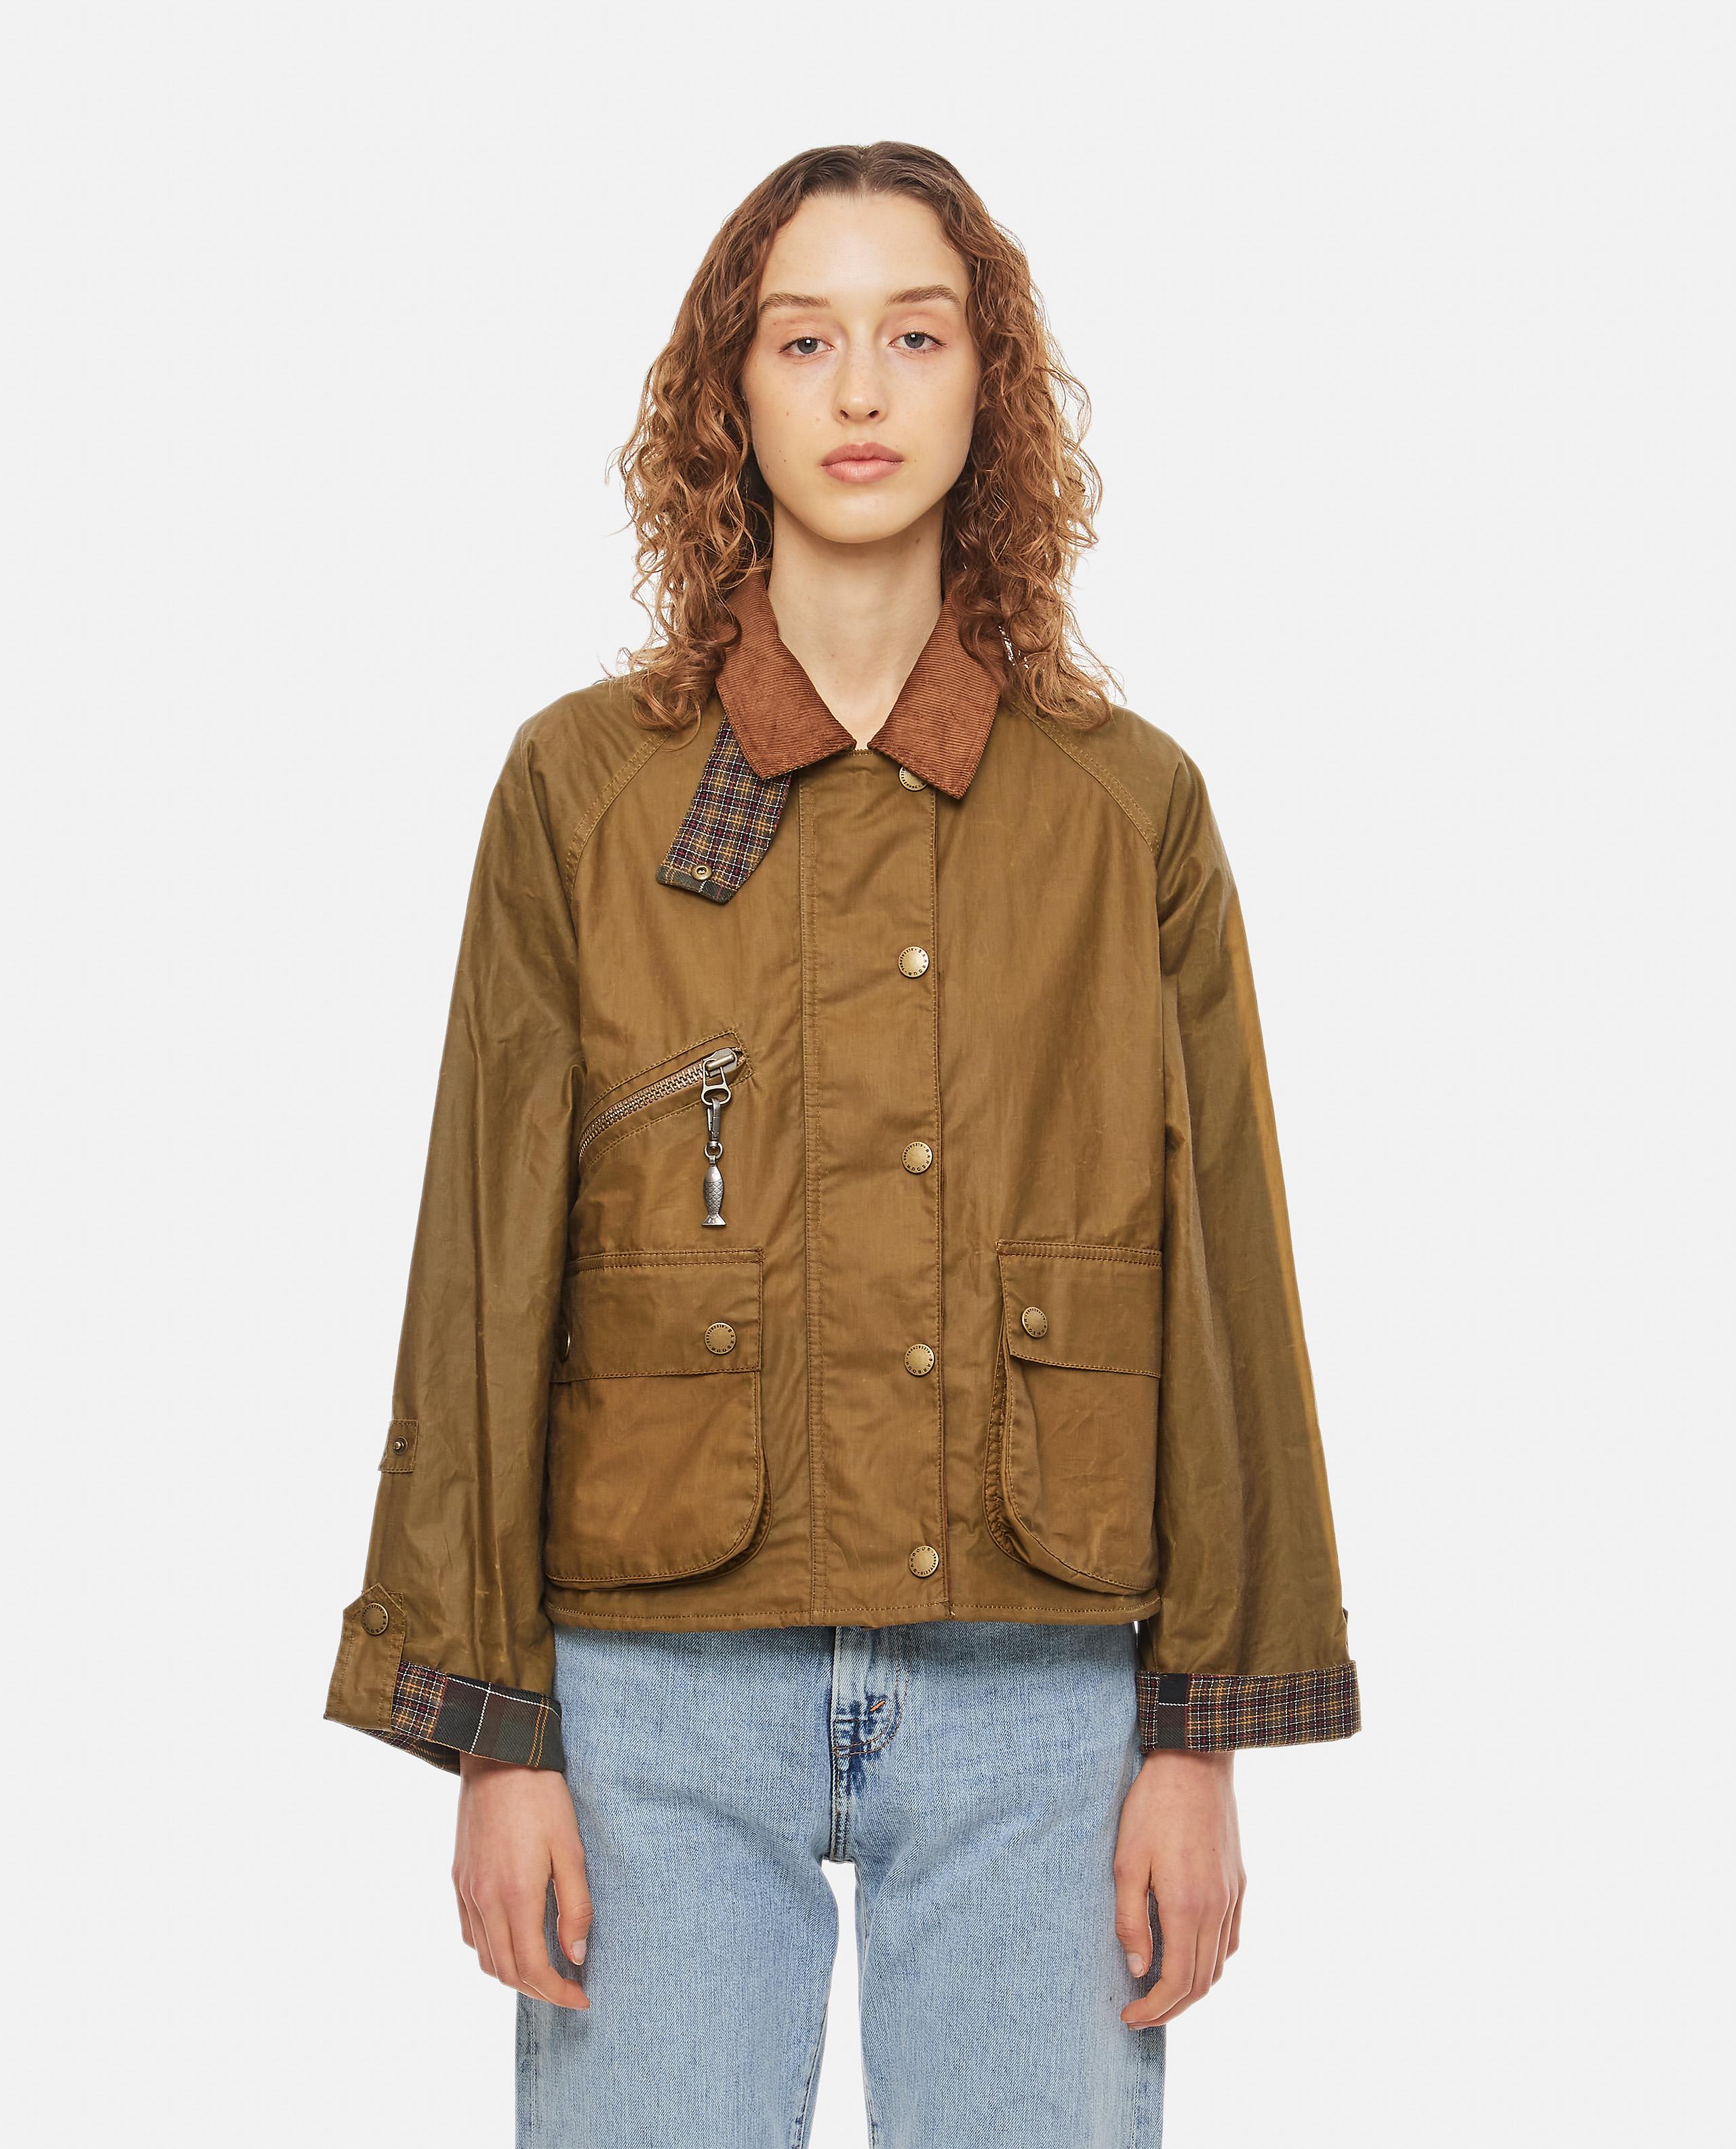 Barbour By Alexa Chung Lucille Jacket in Red | Lyst